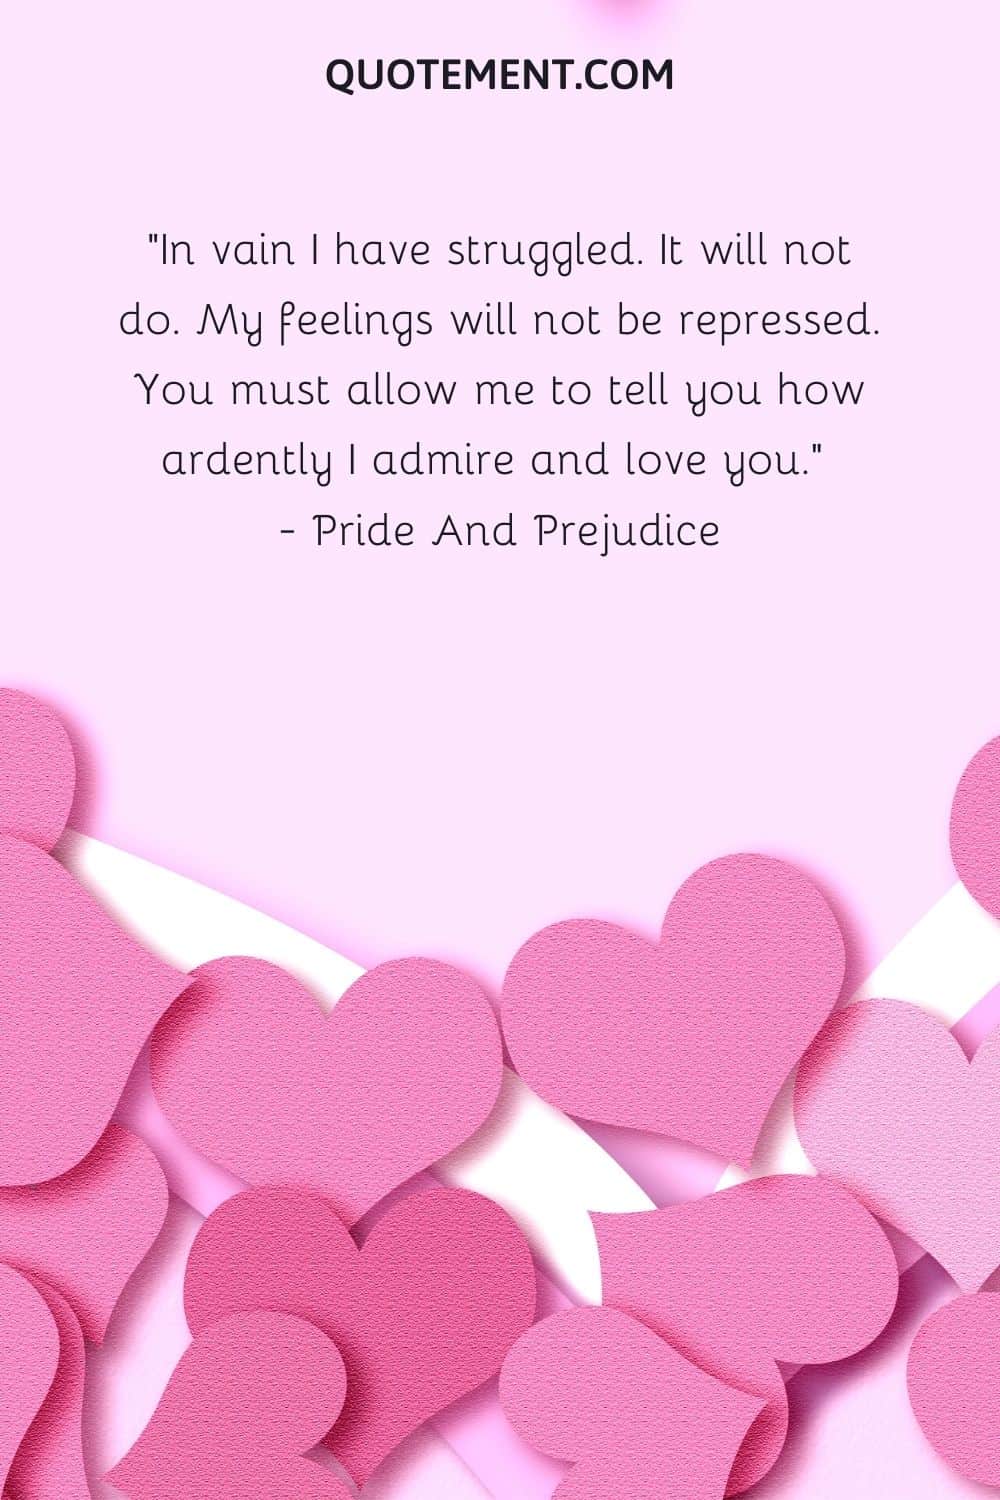 In vain I have struggled. It will not do. My feelings will not be repressed. You must allow me to tell you how ardently I admire and love you.  — Pride And Prejudice